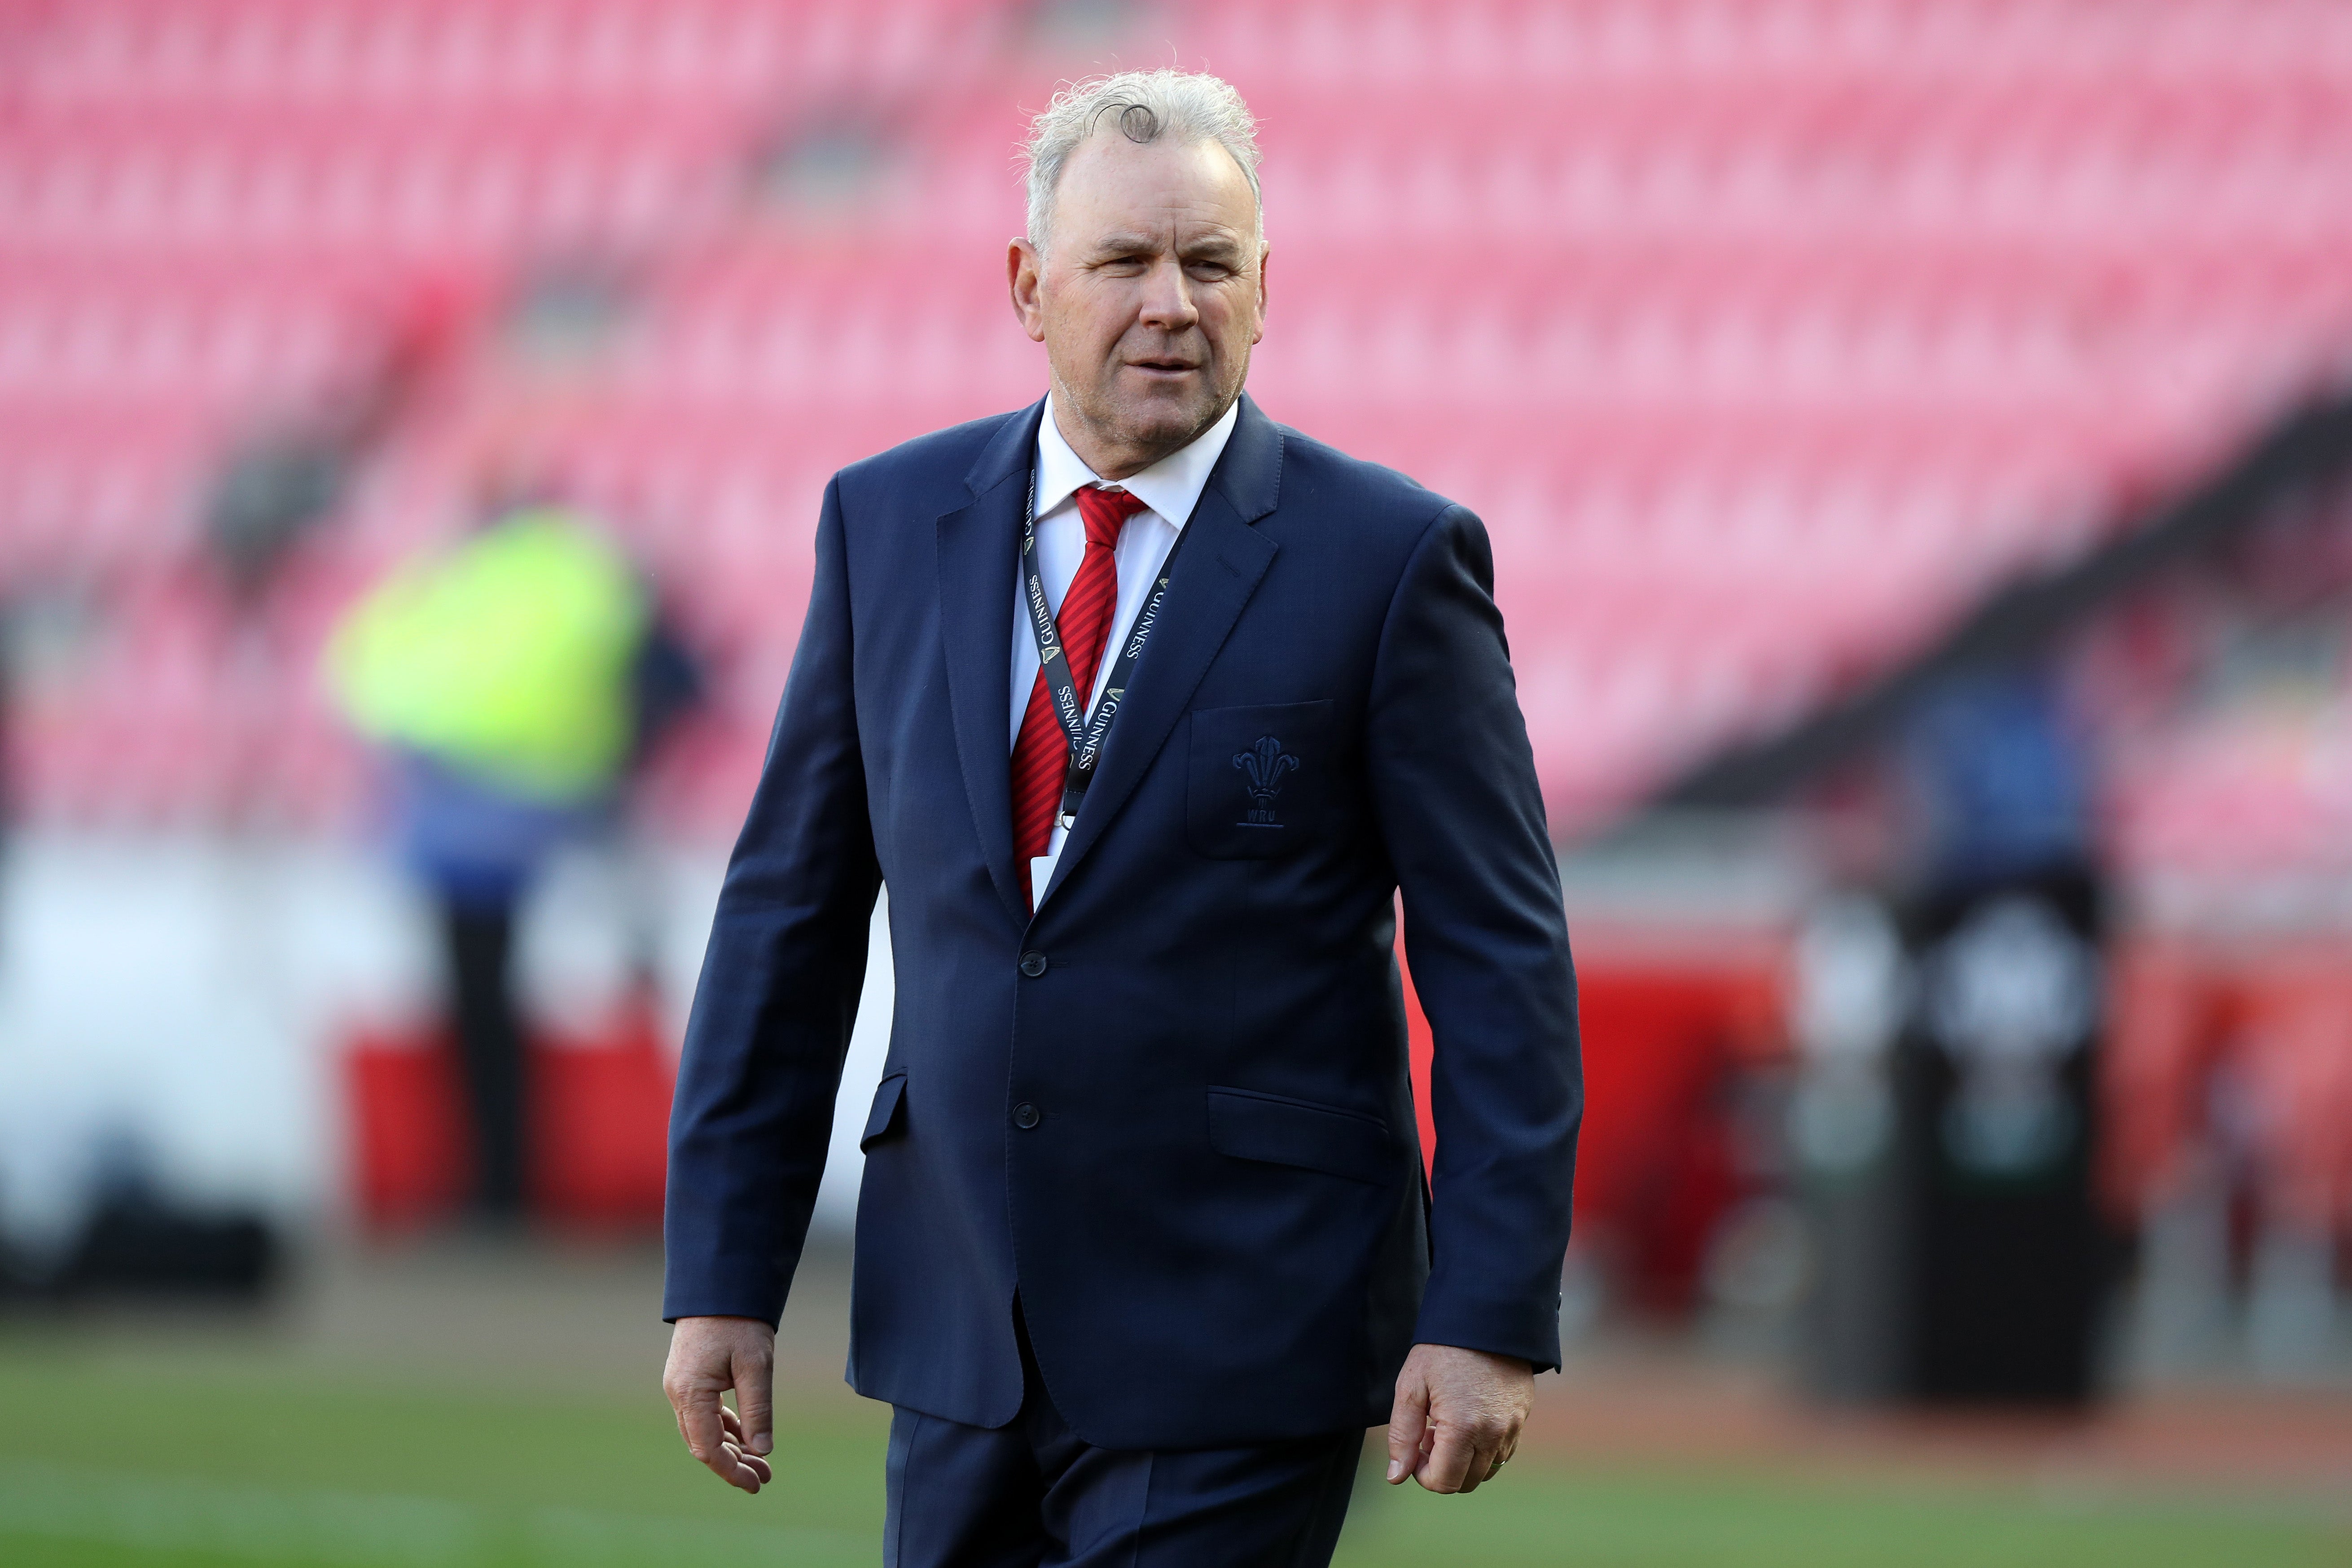 Wales boss Wayne Pivac remains under pressure after failing to win their last five games